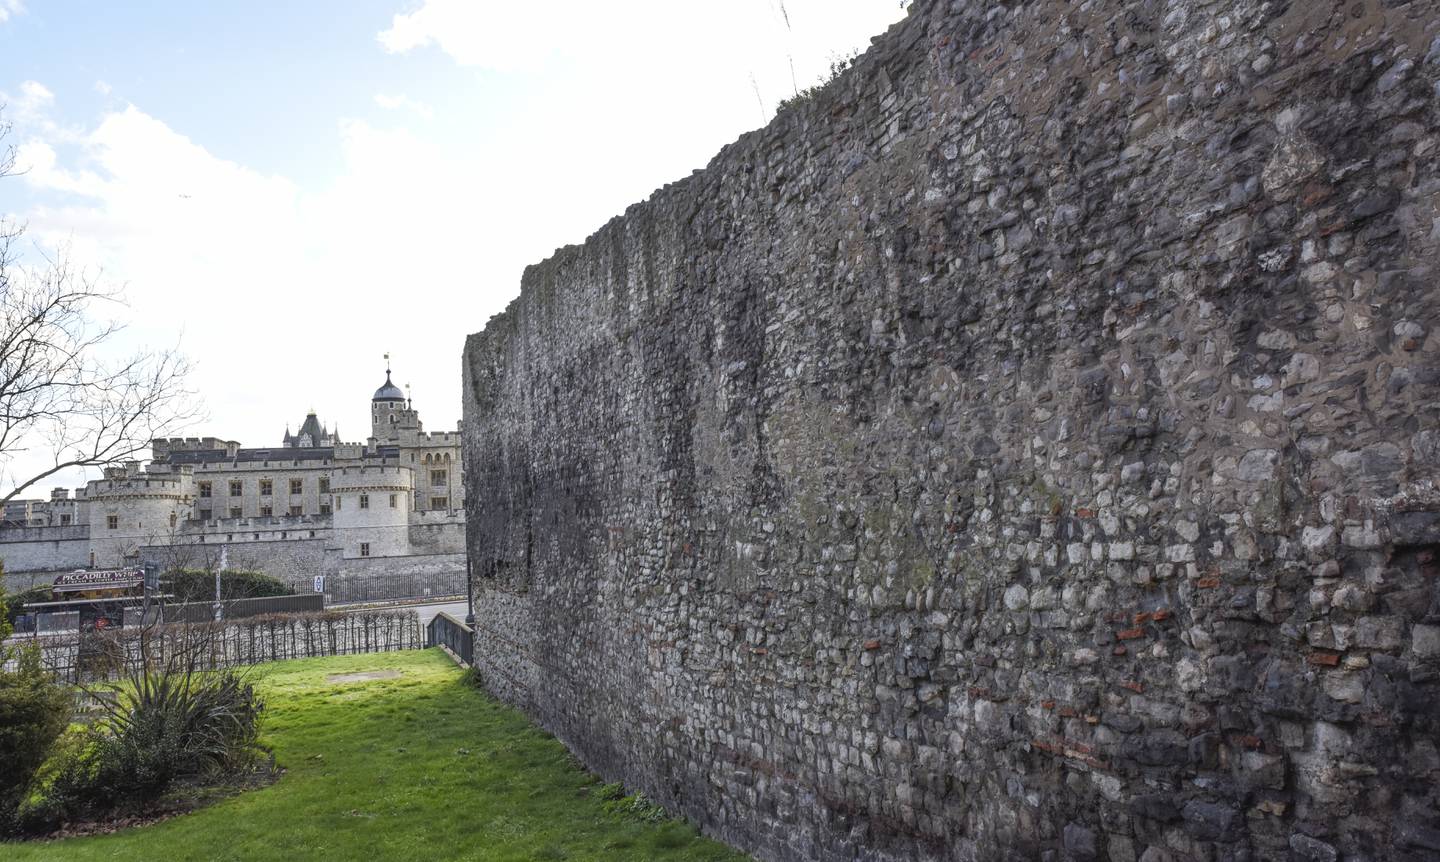 London is brimming with Roman ruins. Photo: Ronan O'Connell